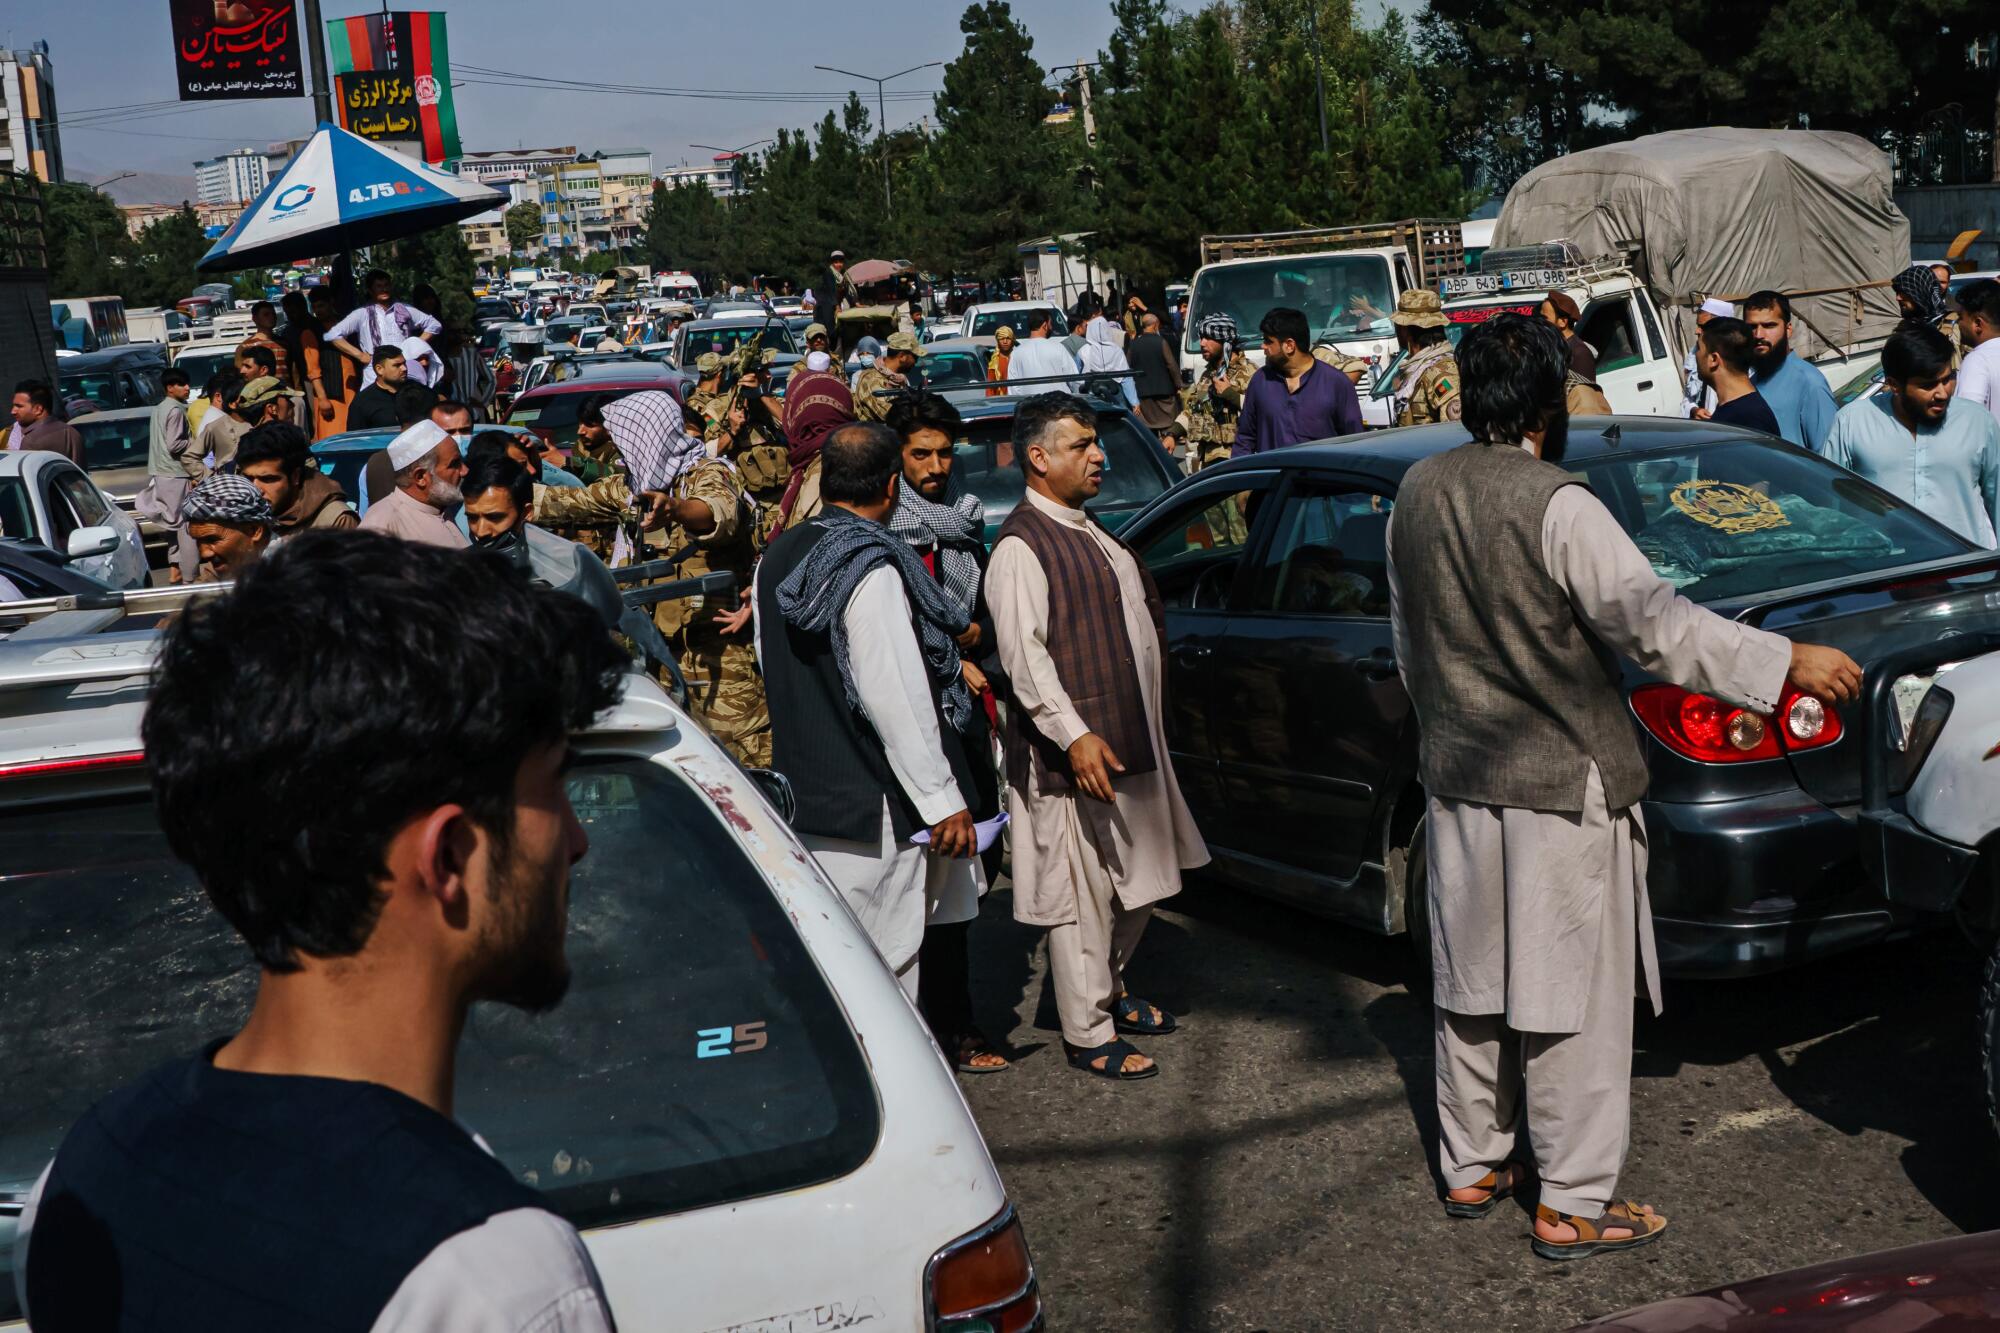  Pedestrians and motorists in a traffic gridlock on a street.